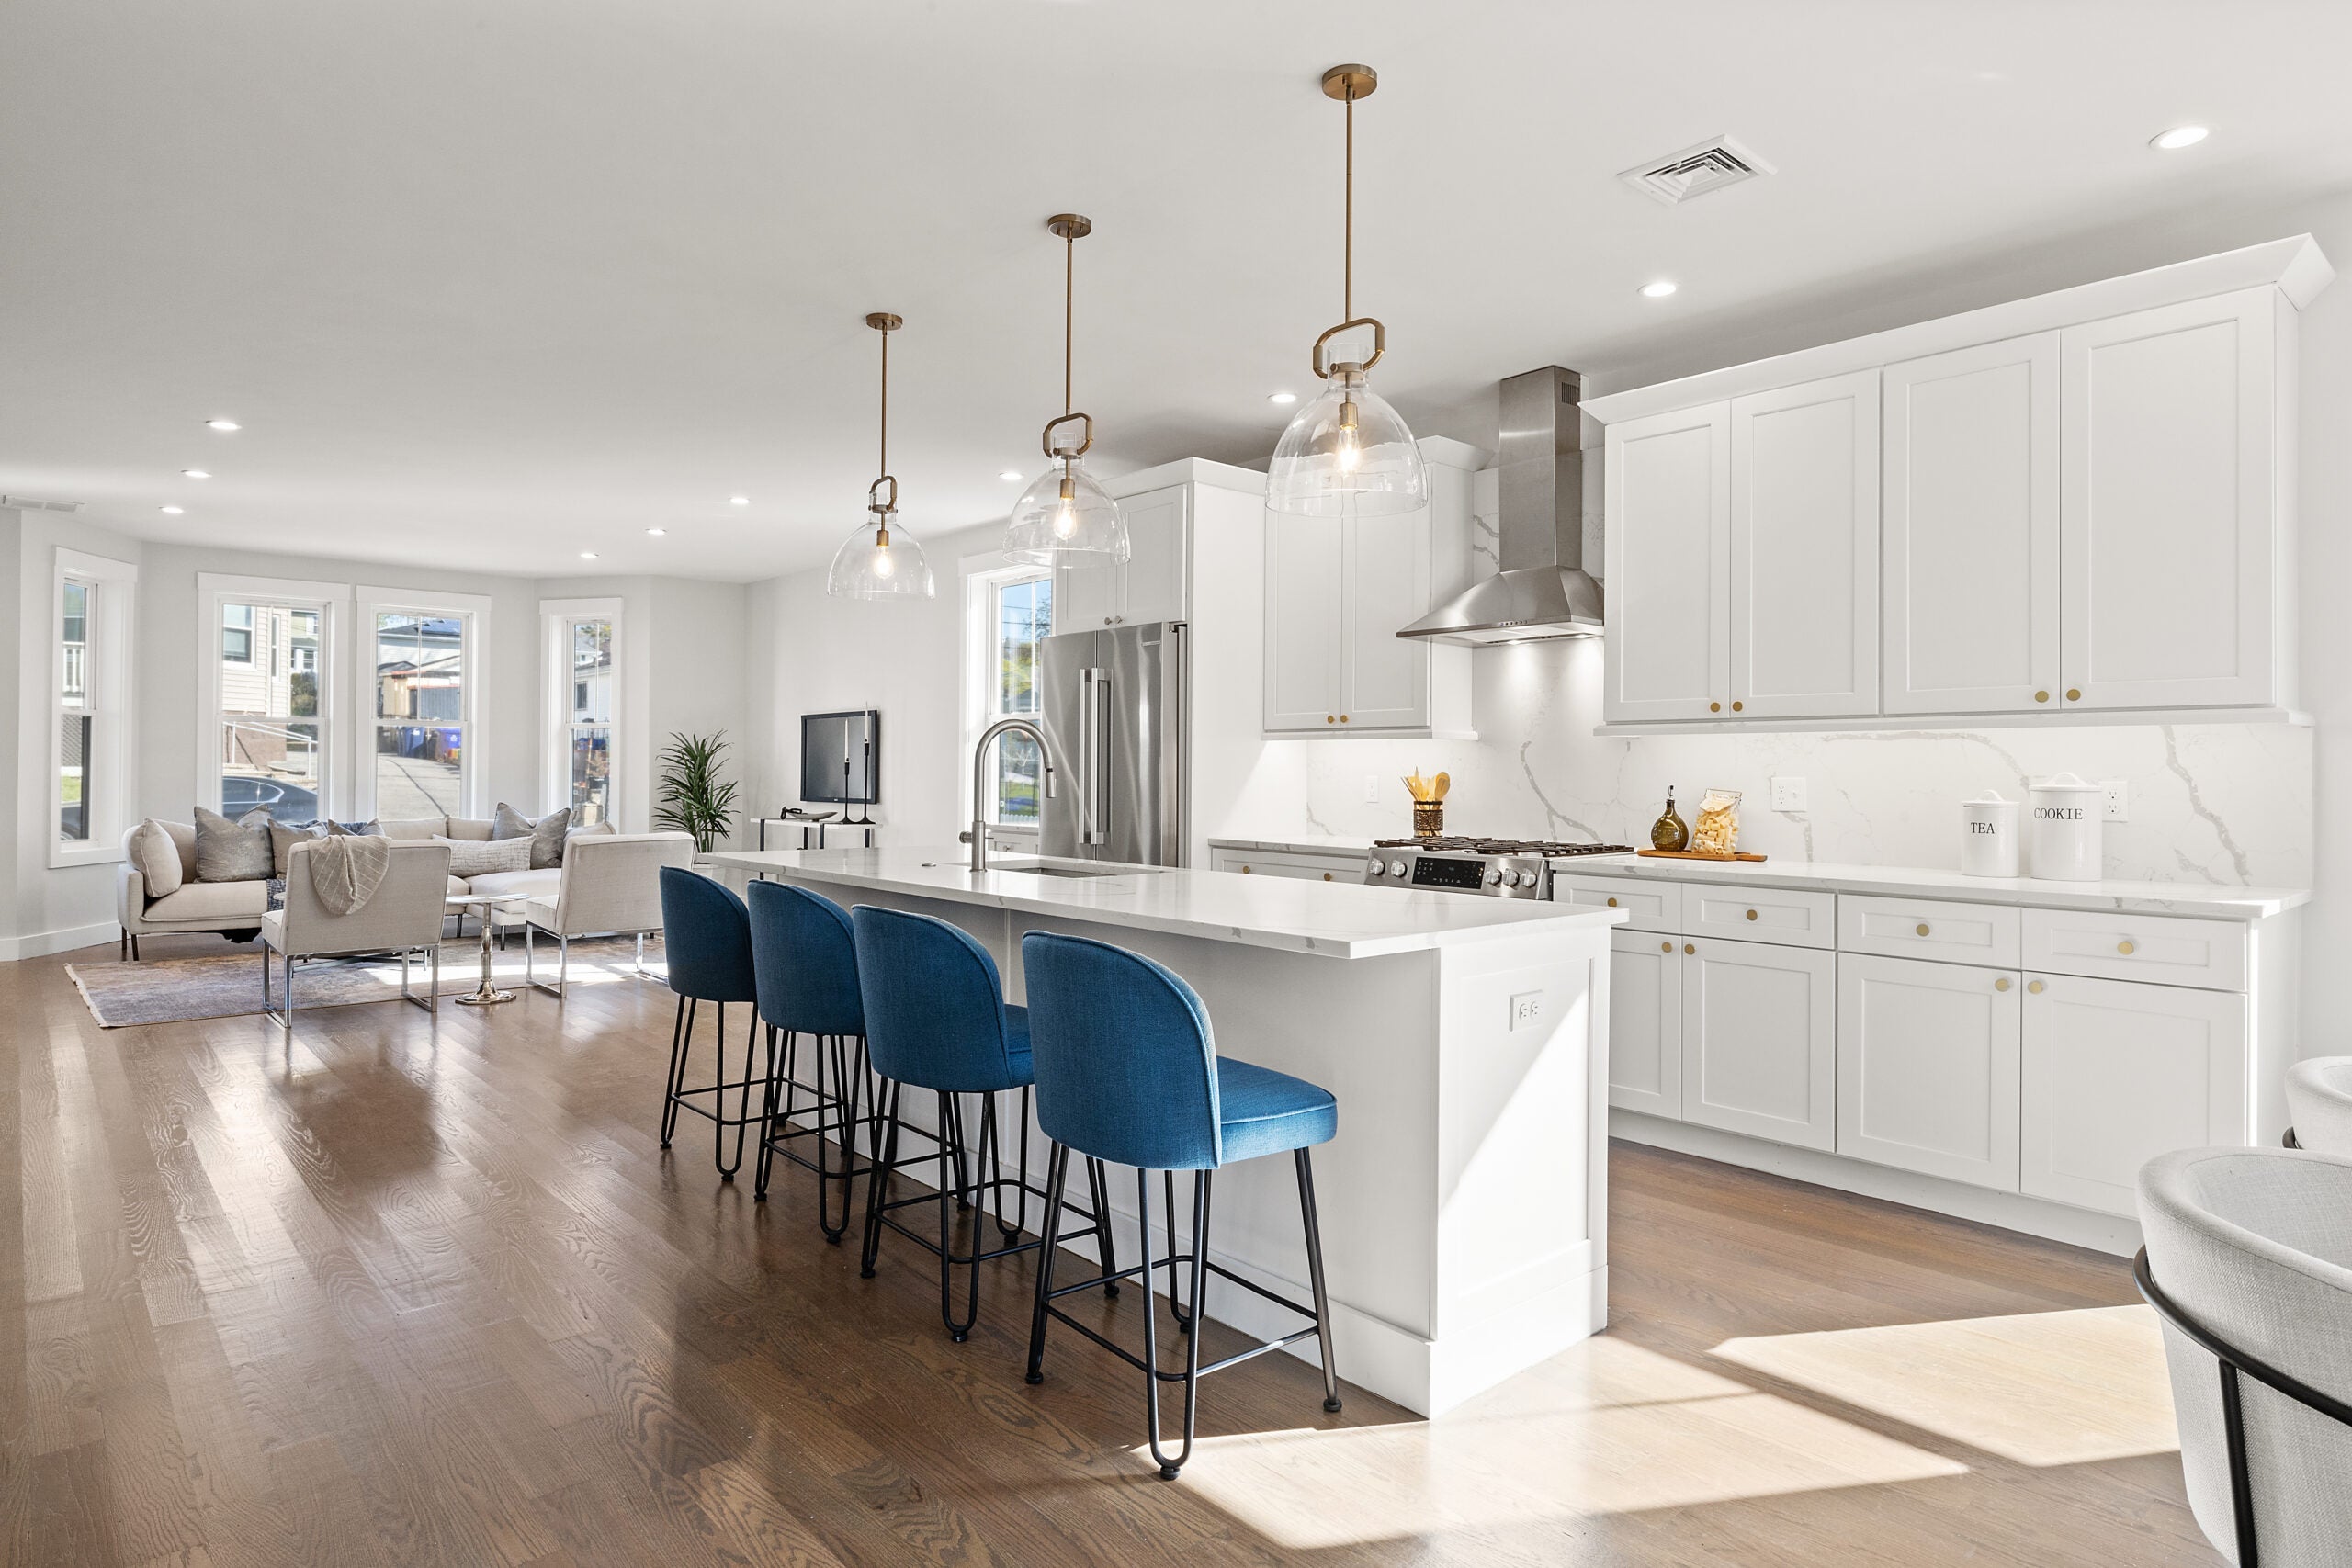 A view from the kitchen into the living area shows a long, white island with a white counter, and blue, backed seating for four. Three globe lights hang above it. The cabinets, which do not extend to the ceiling, are Shaker-style and white, and the appliances are stainless steel. The flooring is a medium-toned wood. Home of the Week in Mattapan.